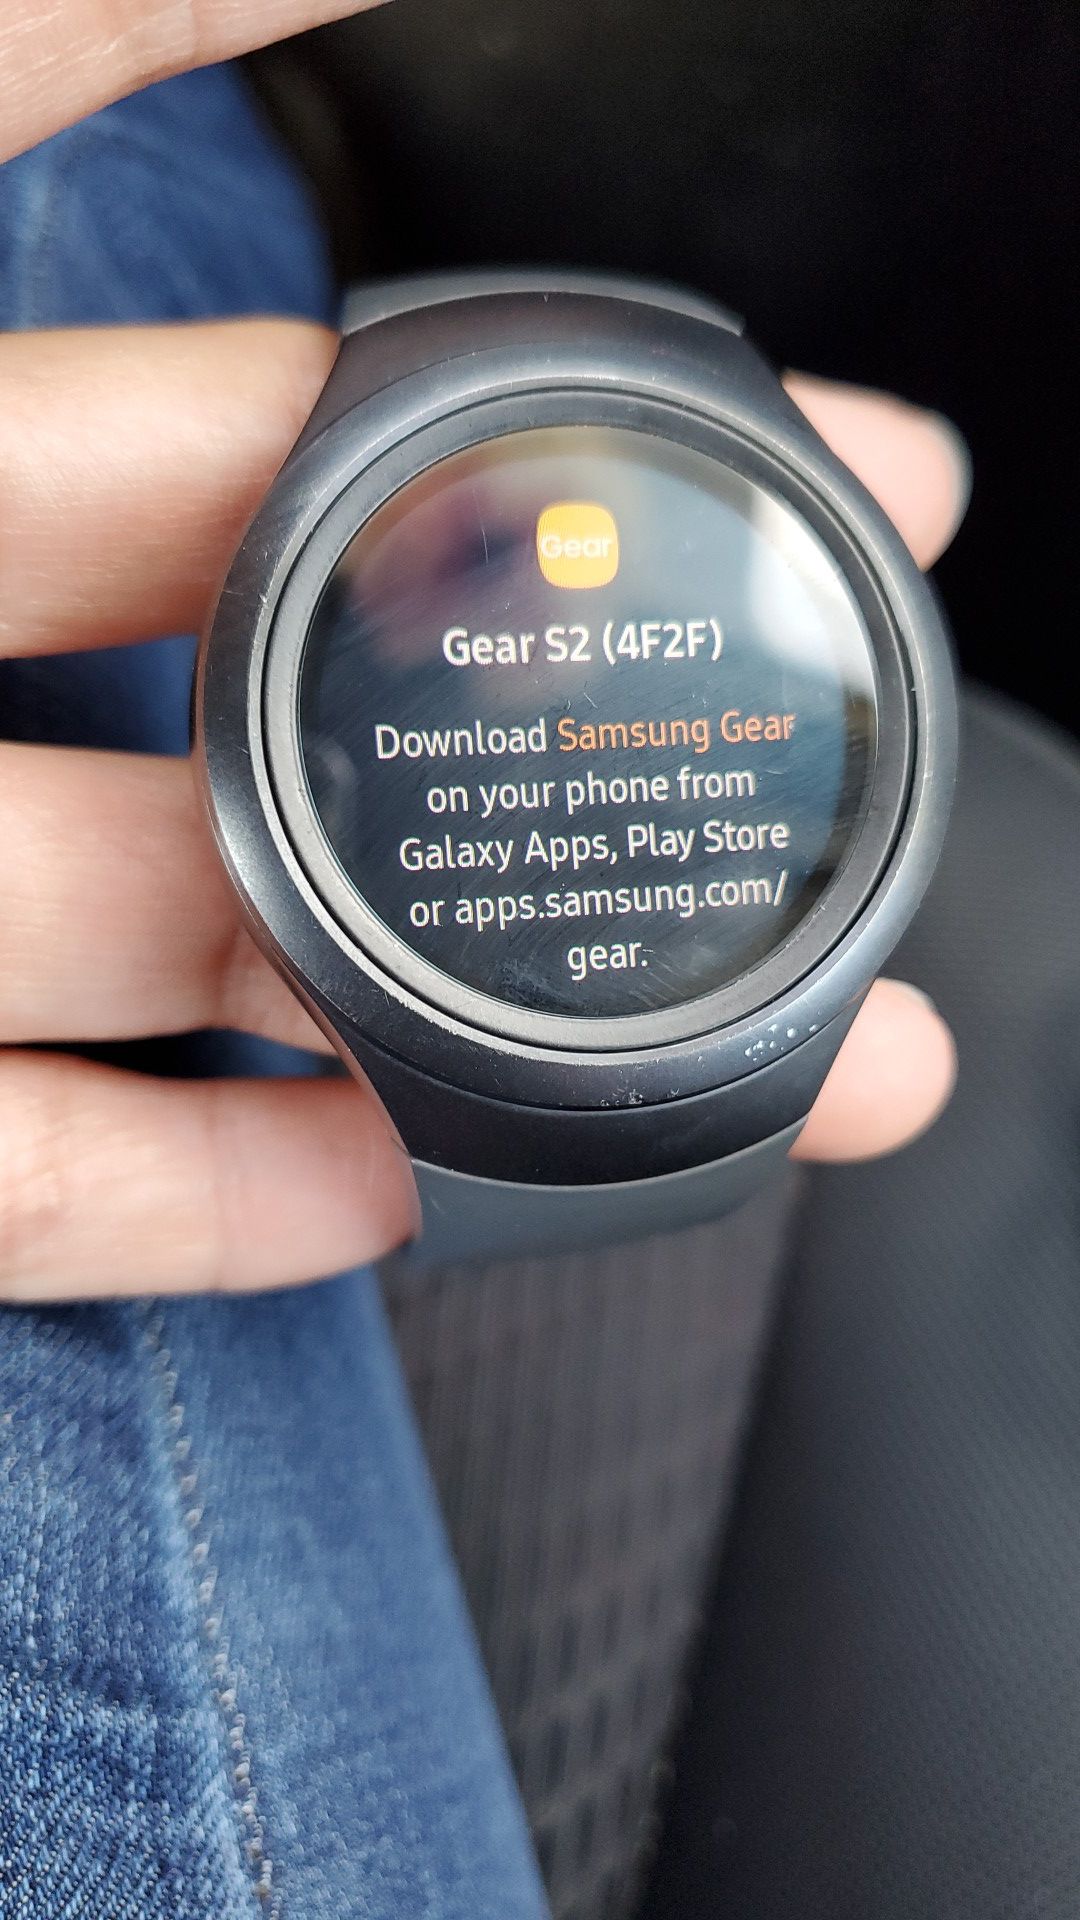 Gear s2 for samsung phones